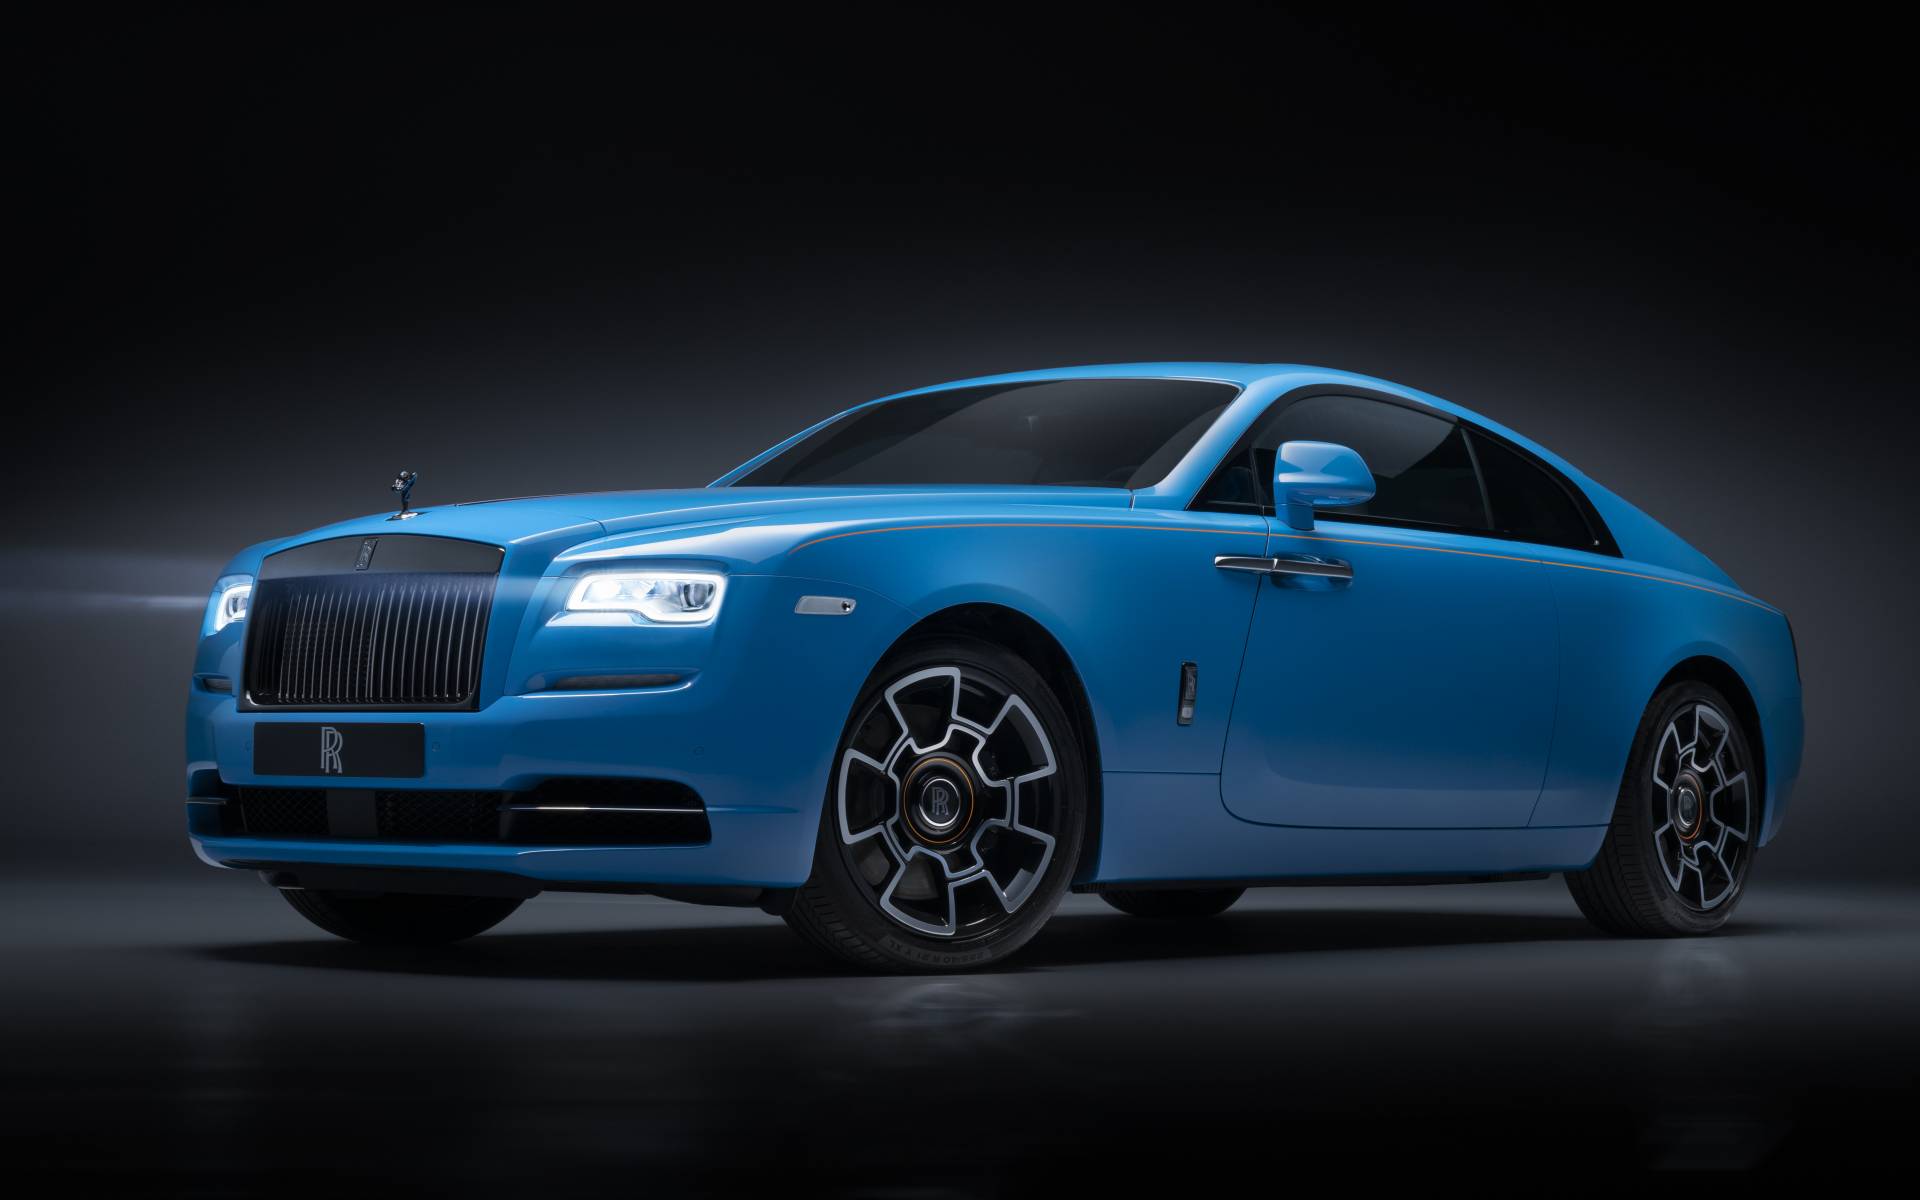 2020 Rolls Royce Wraith News Reviews Picture Galleries And